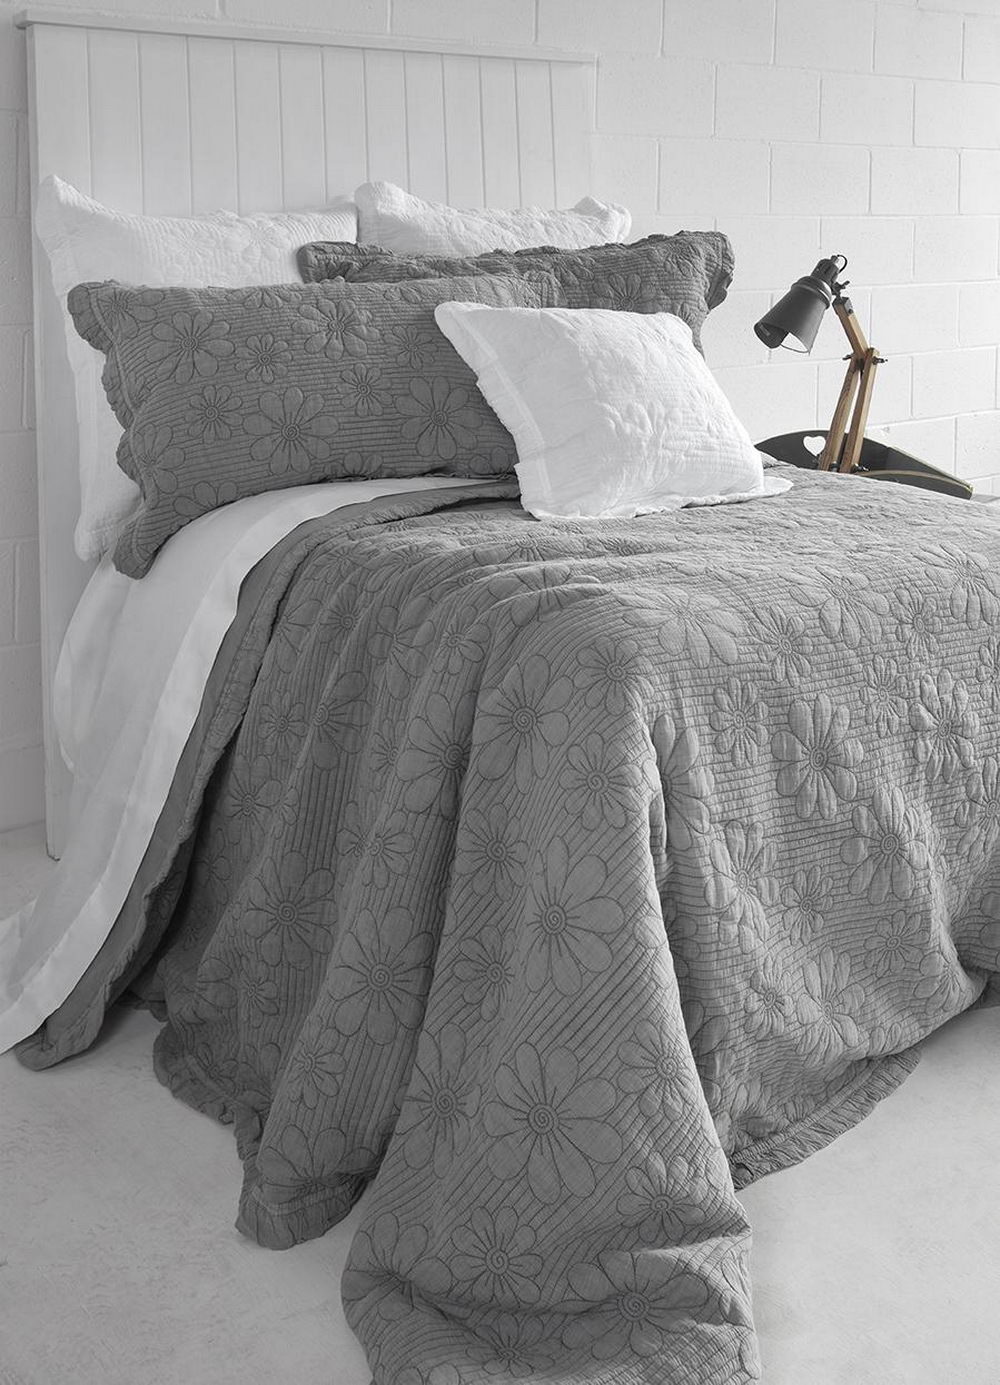 Organic, Bedding collection from Brunelli